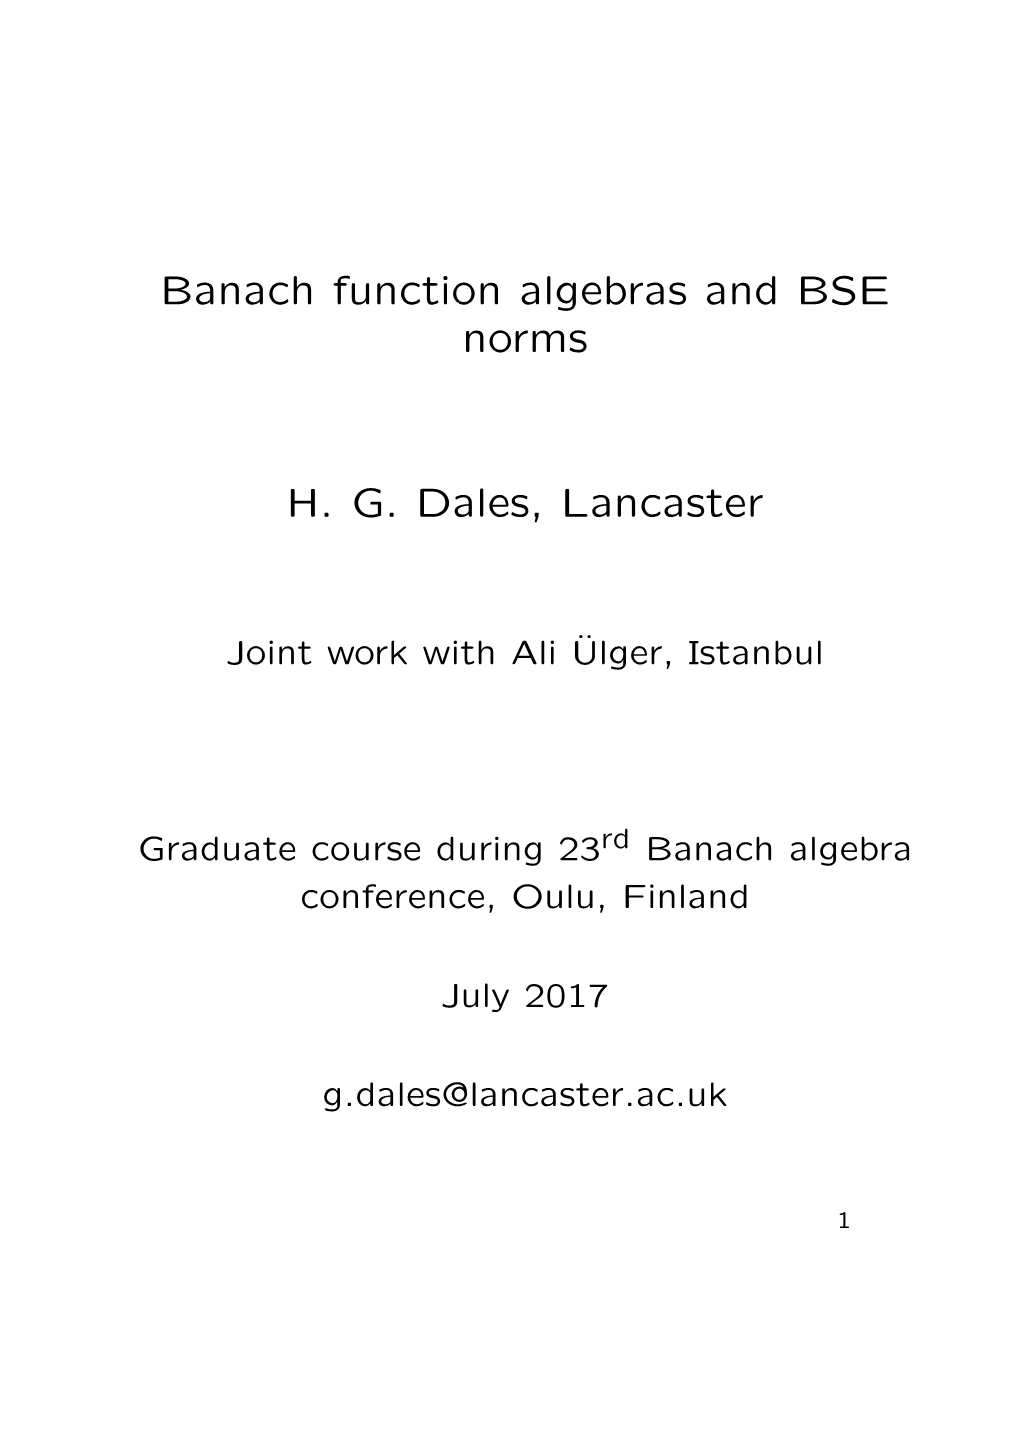 Banach Function Algebras and BSE Norms H. G. Dales, Lancaster